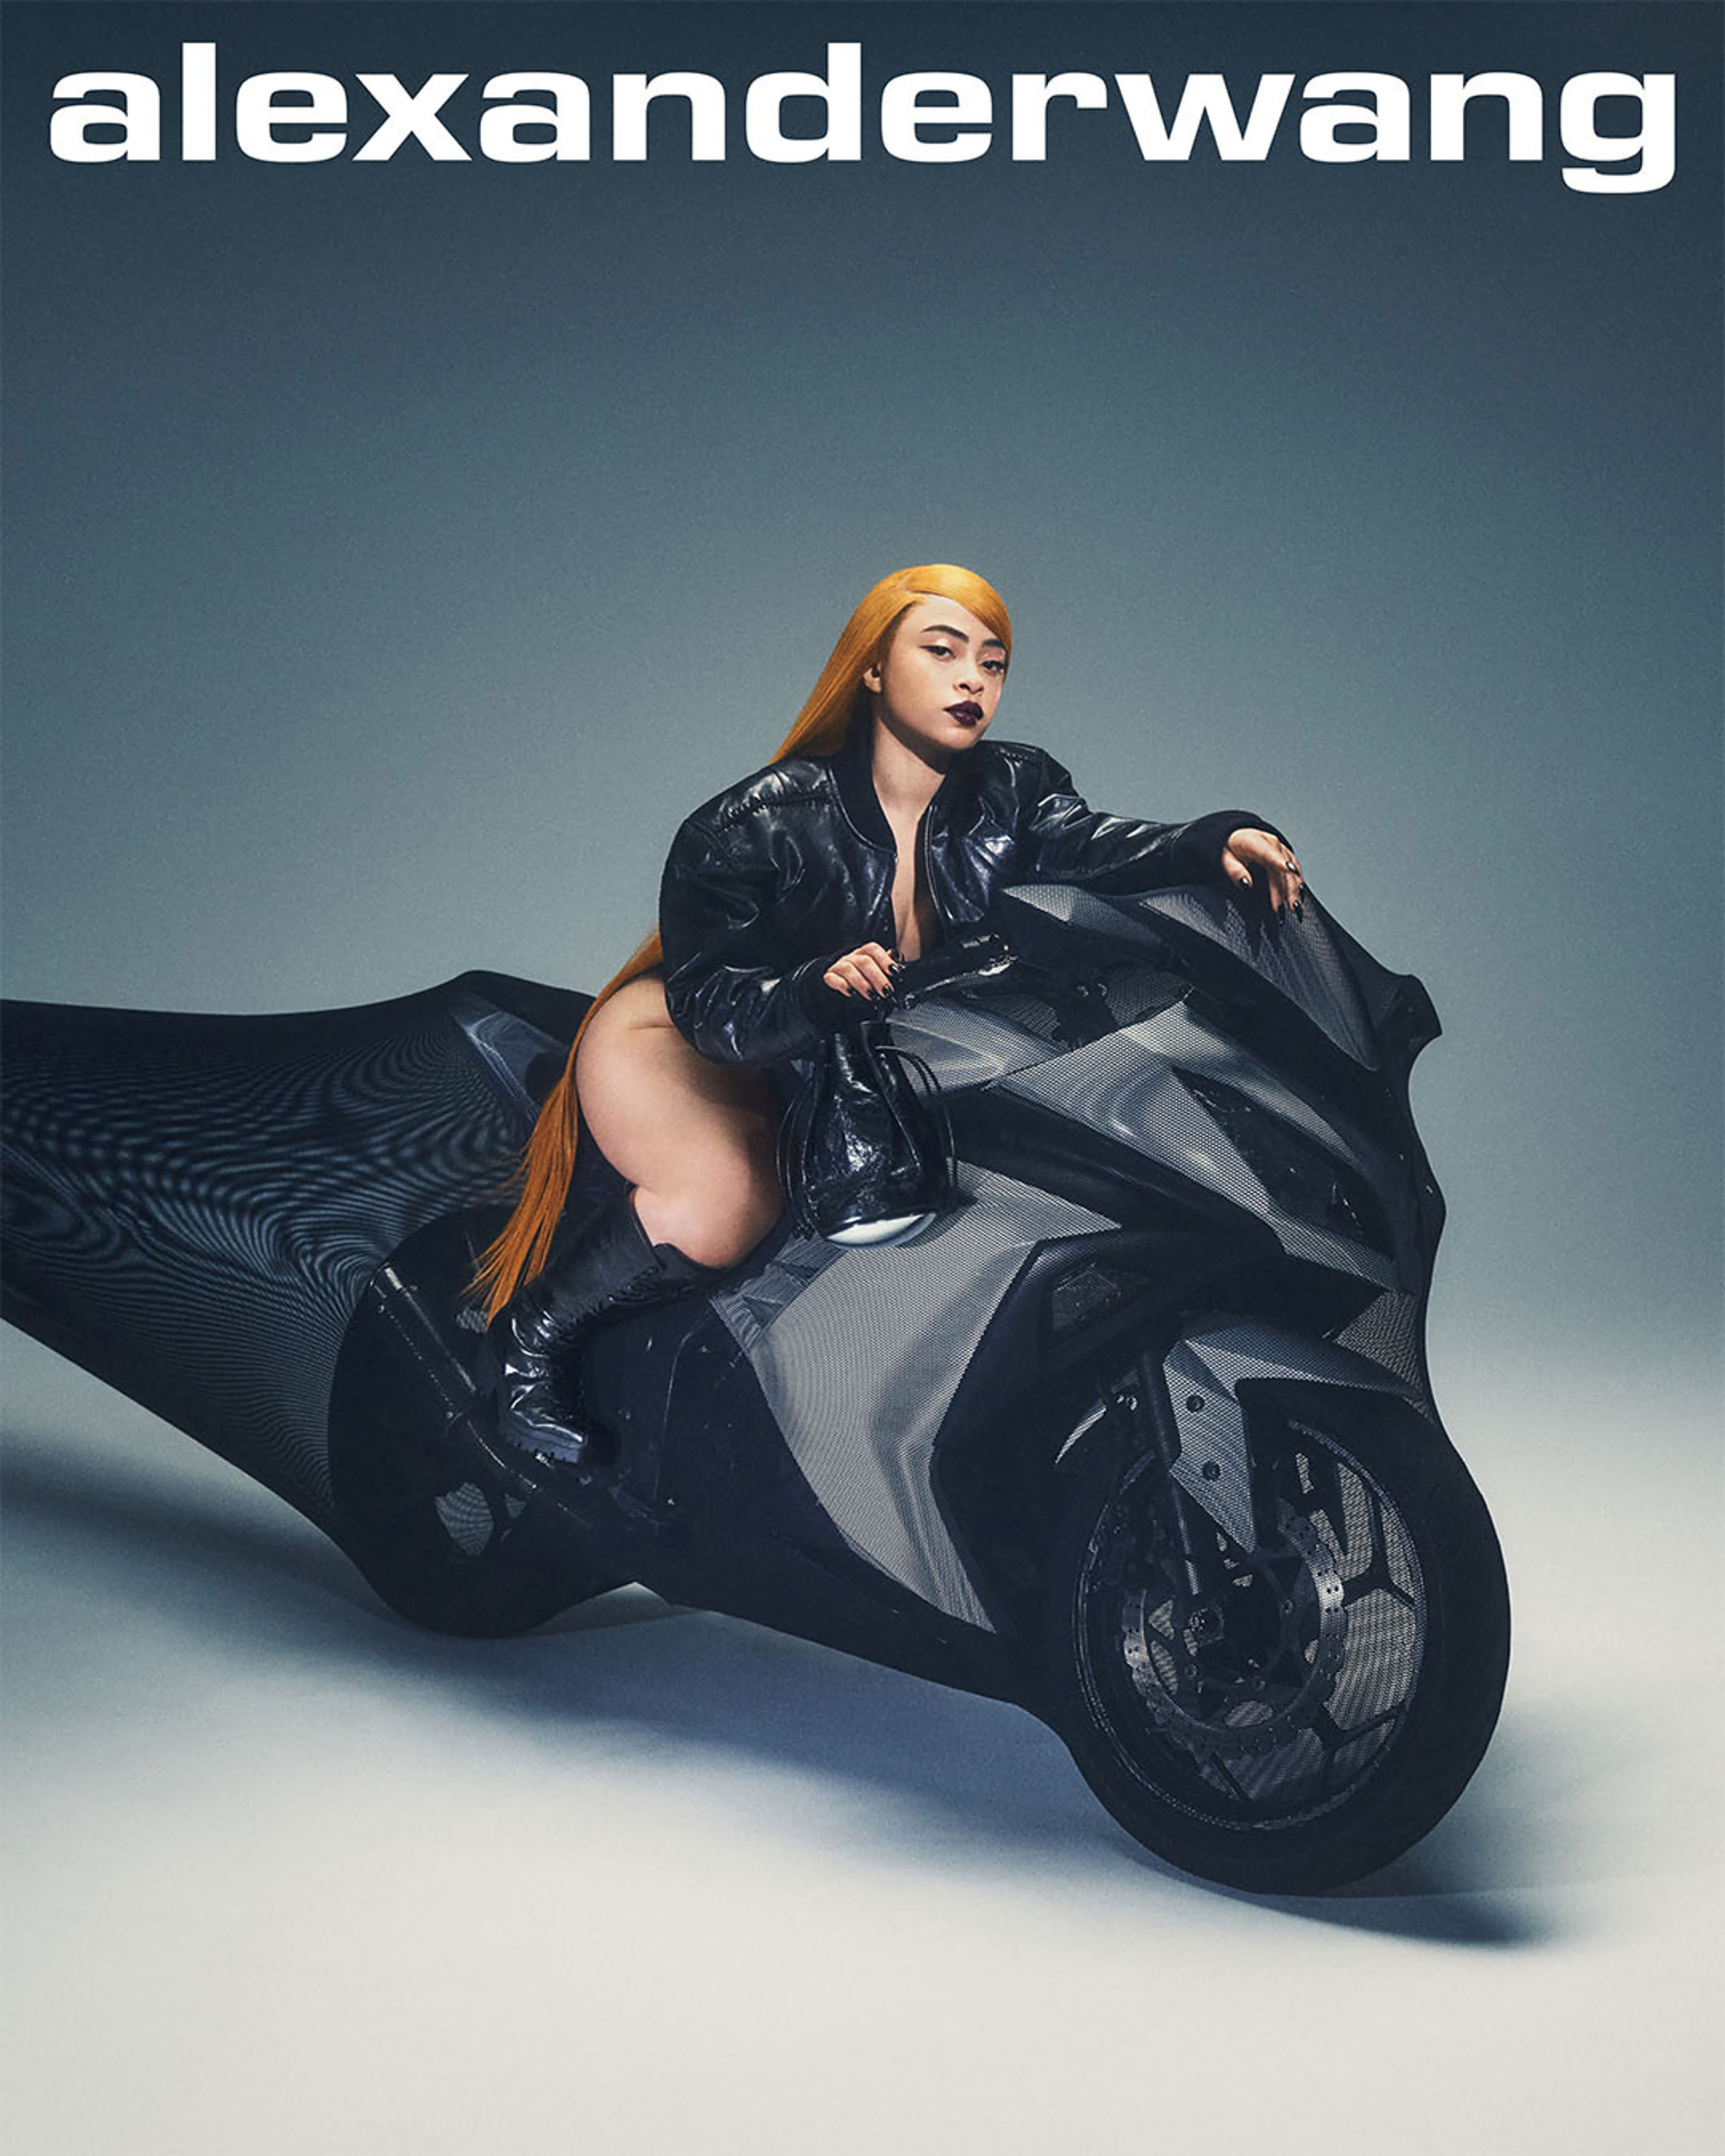 Person in a black outfit on a motorcycle for an Alexander Wang advertisement